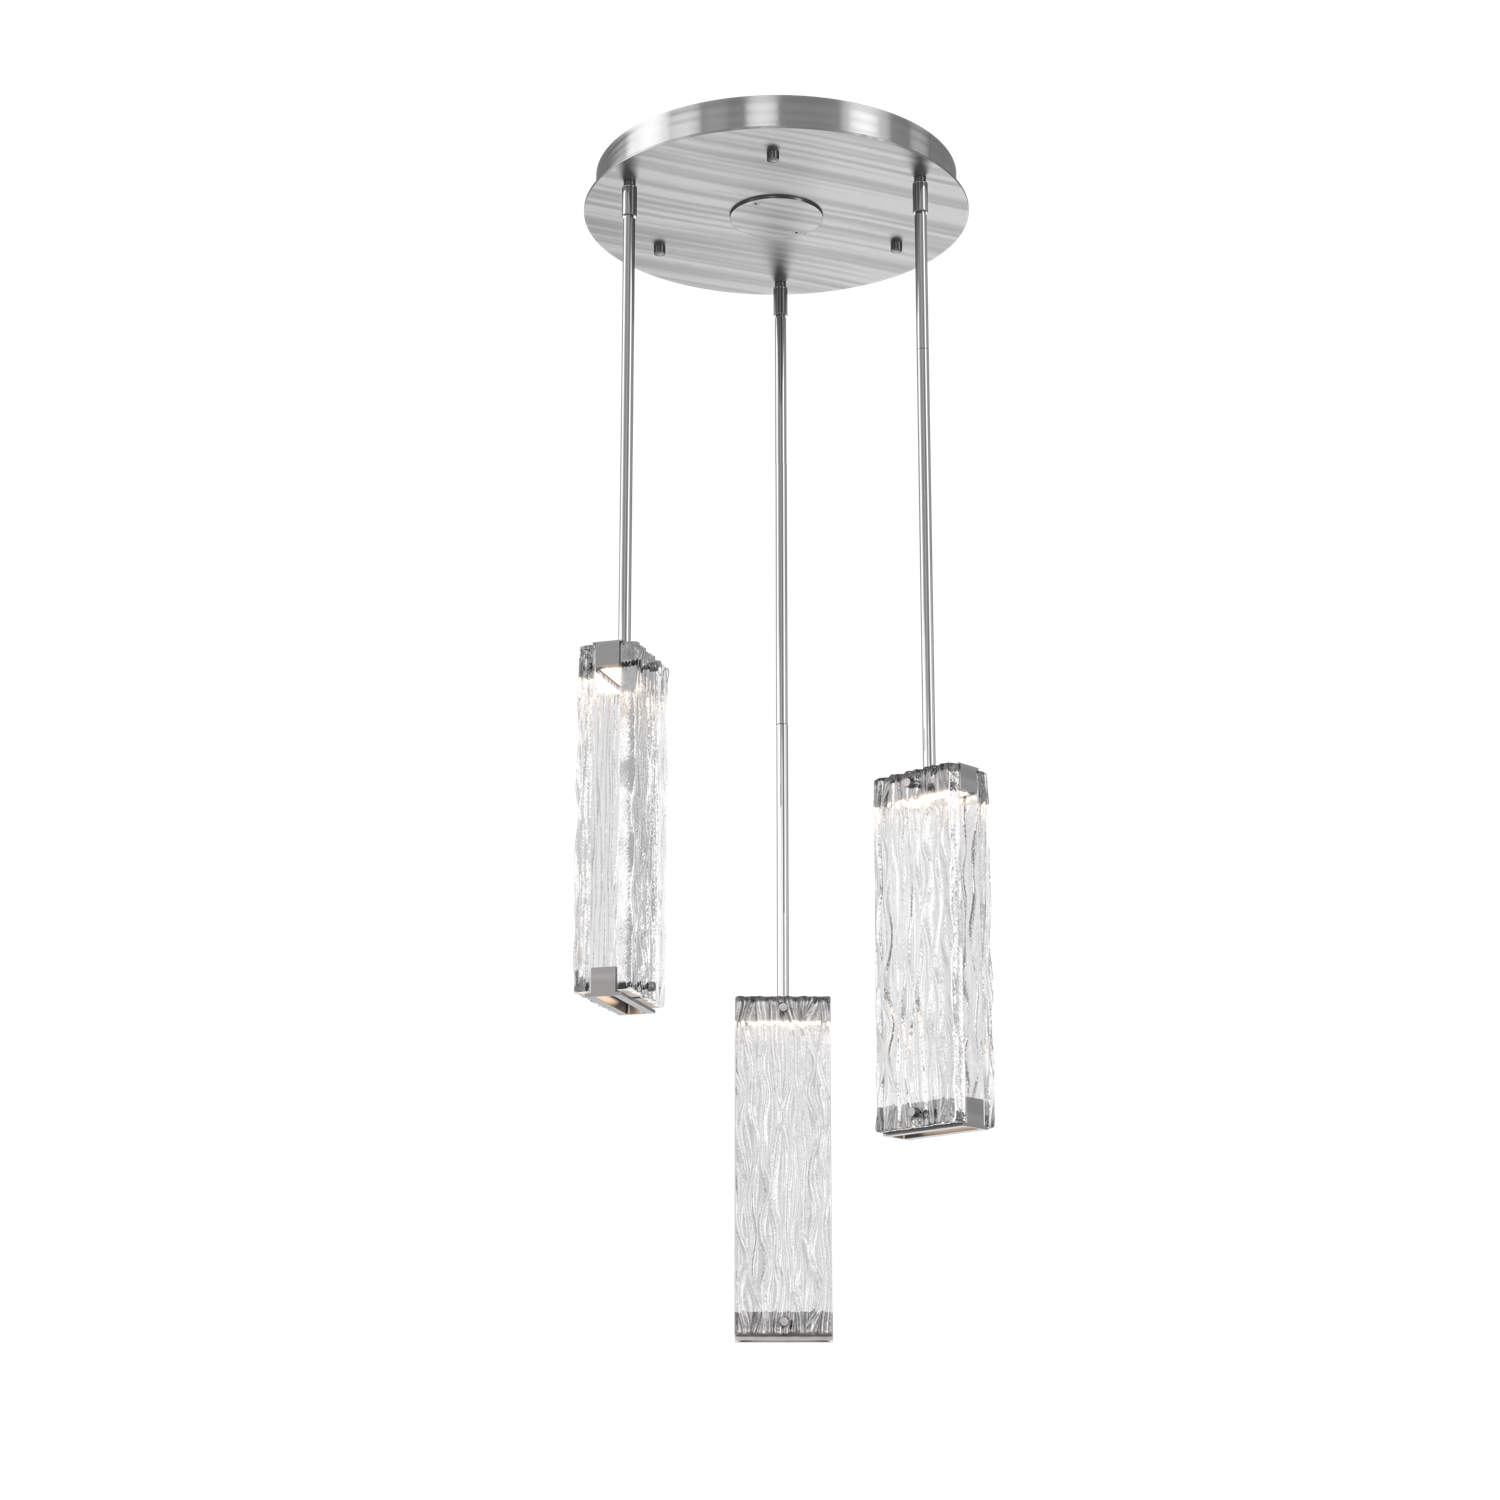 CHB0090-03-SN-TT-Hammerton-Studio-Tabulo-3-light-multi-pendant-chandelier-with-satin-nickel-finish-and-clear-tidal-cast-glass-shade-and-LED-lamping